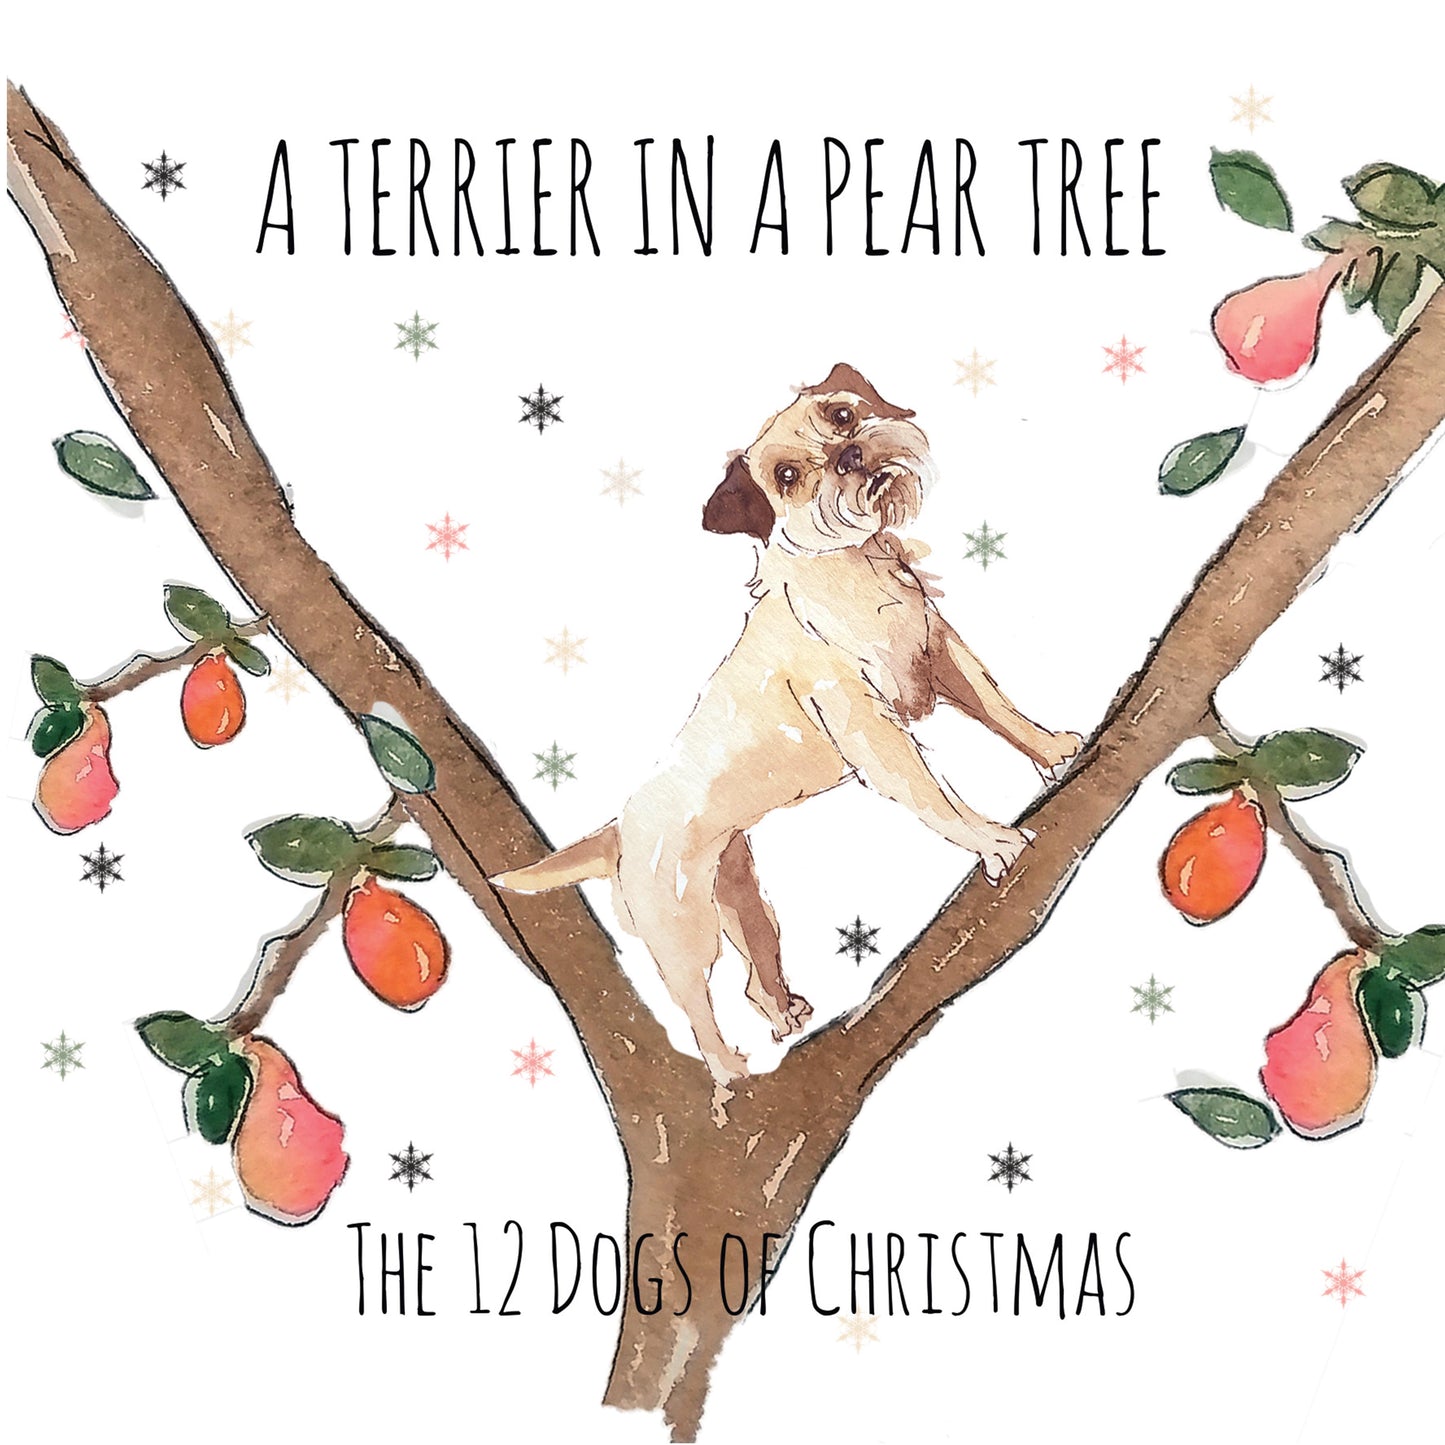 A Terrier in a Pear Tree - Greeting Card